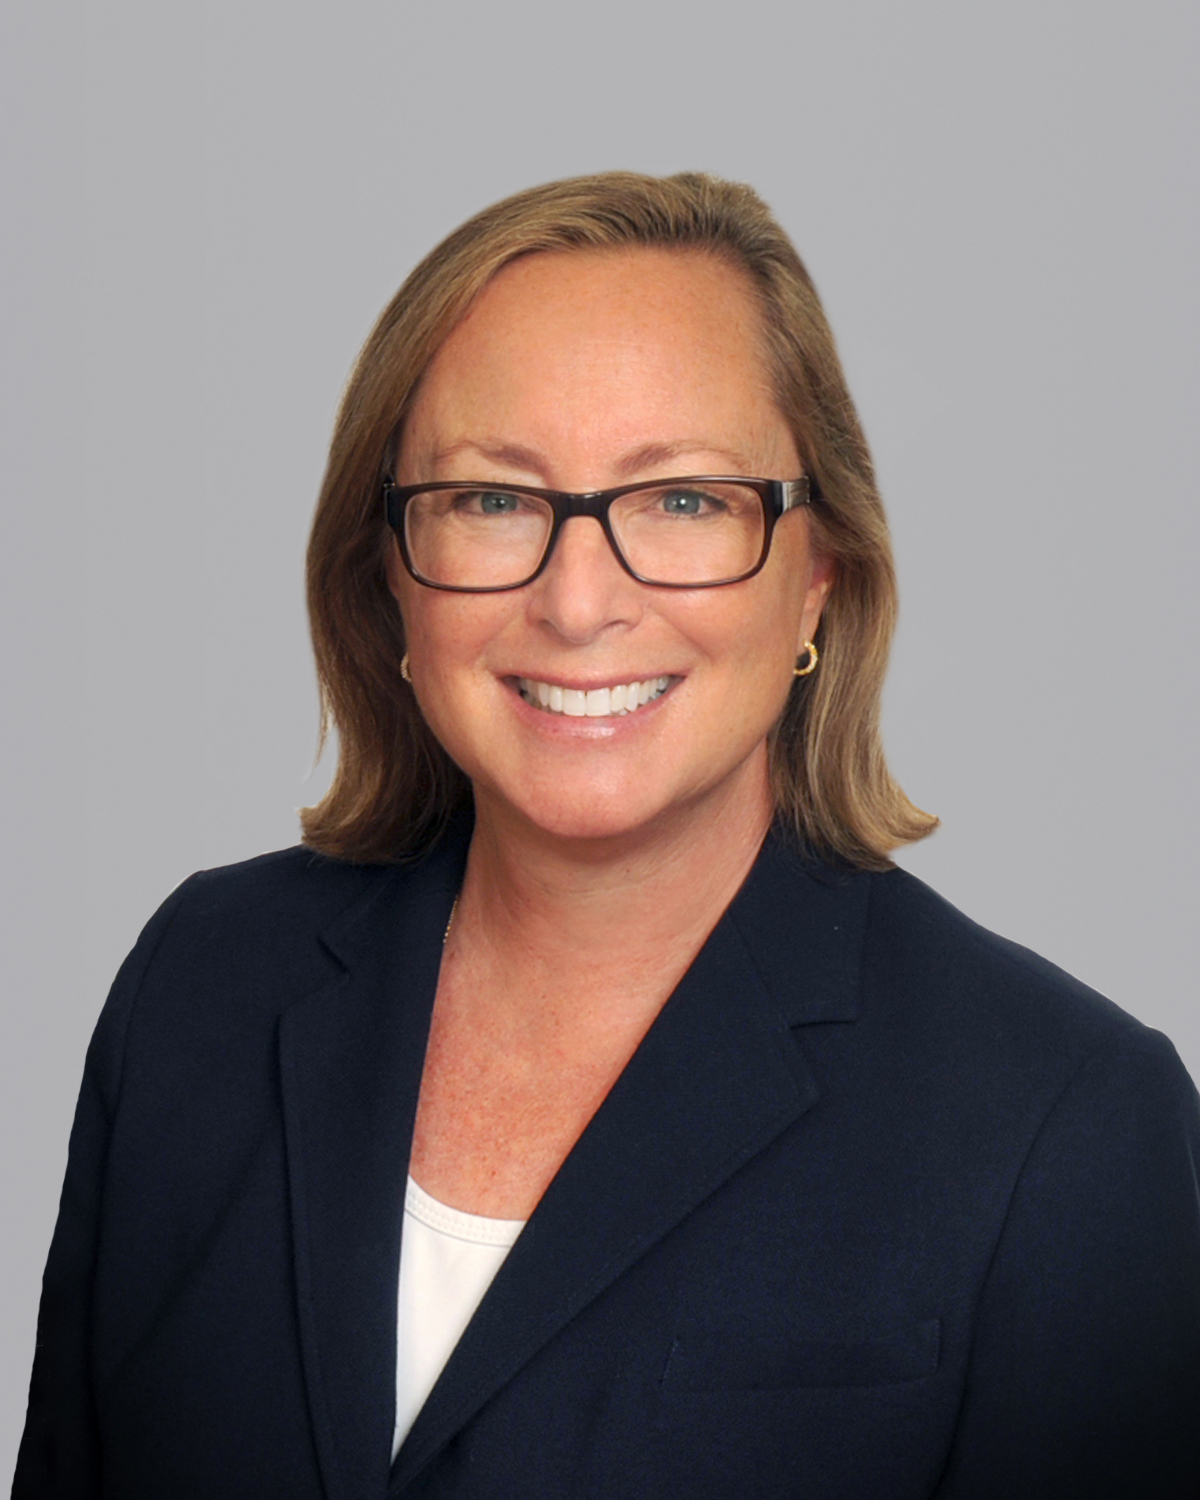 COURTESY PHOTO — Wendy Giffin, a Cushman & Wakefield director, is FGCAR's 2019 president.